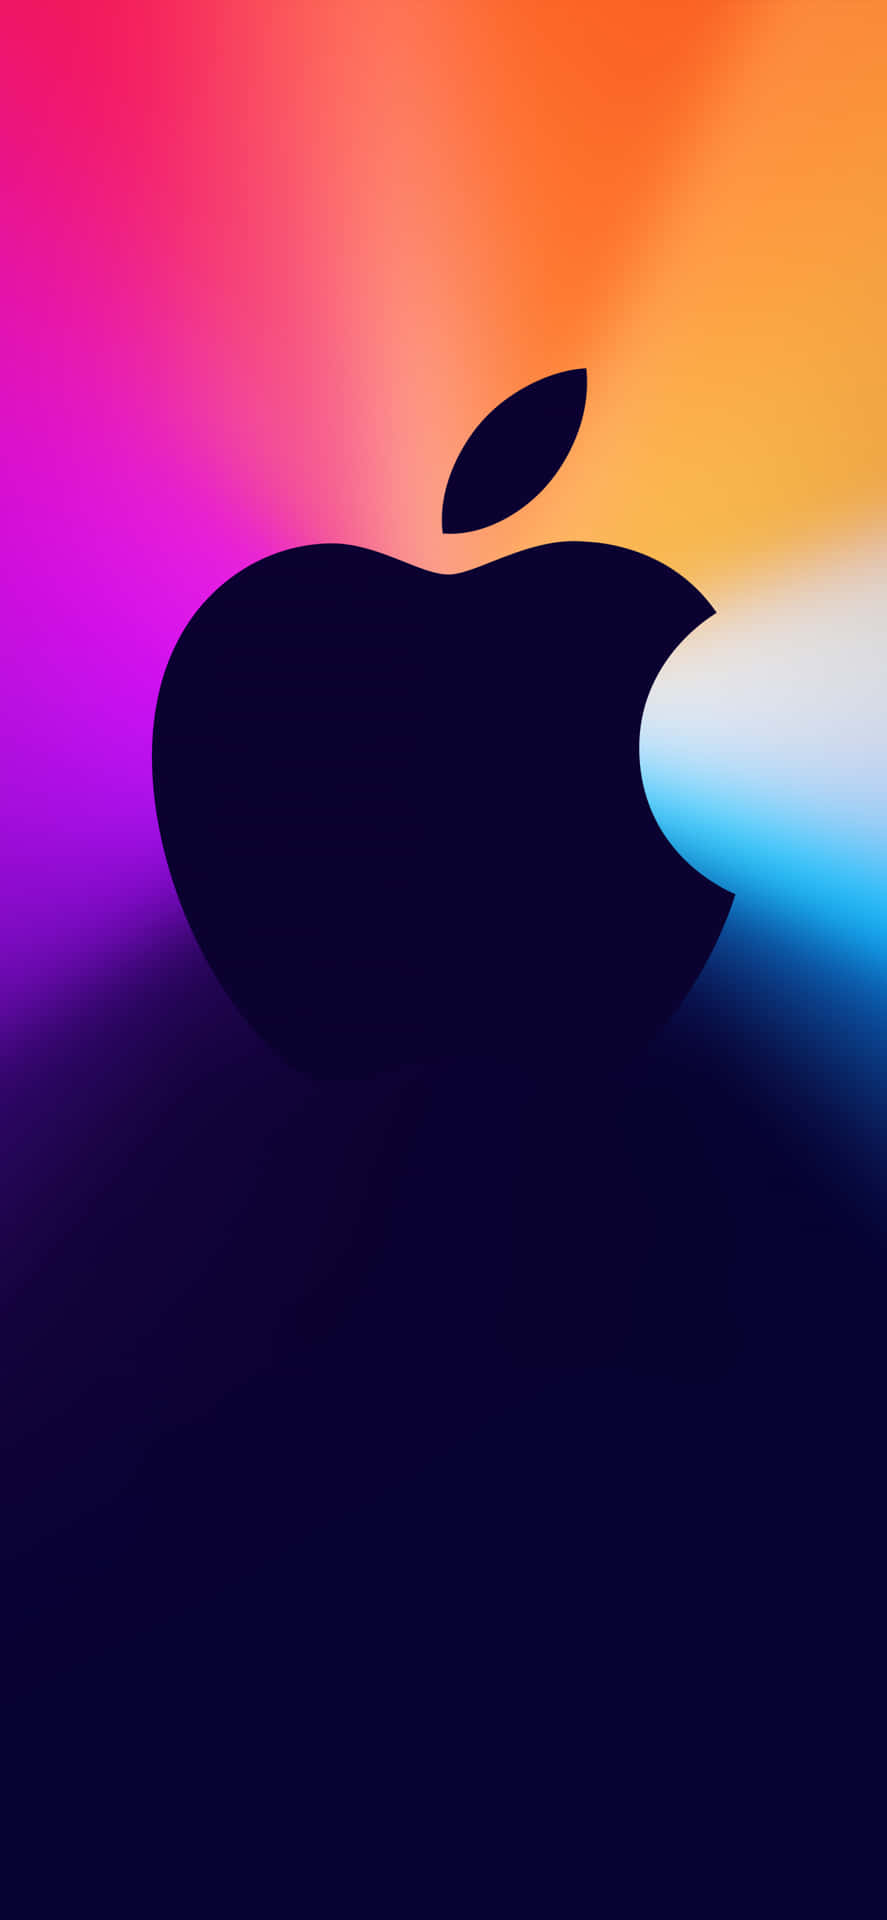 The iconic Apple logo with colorful background